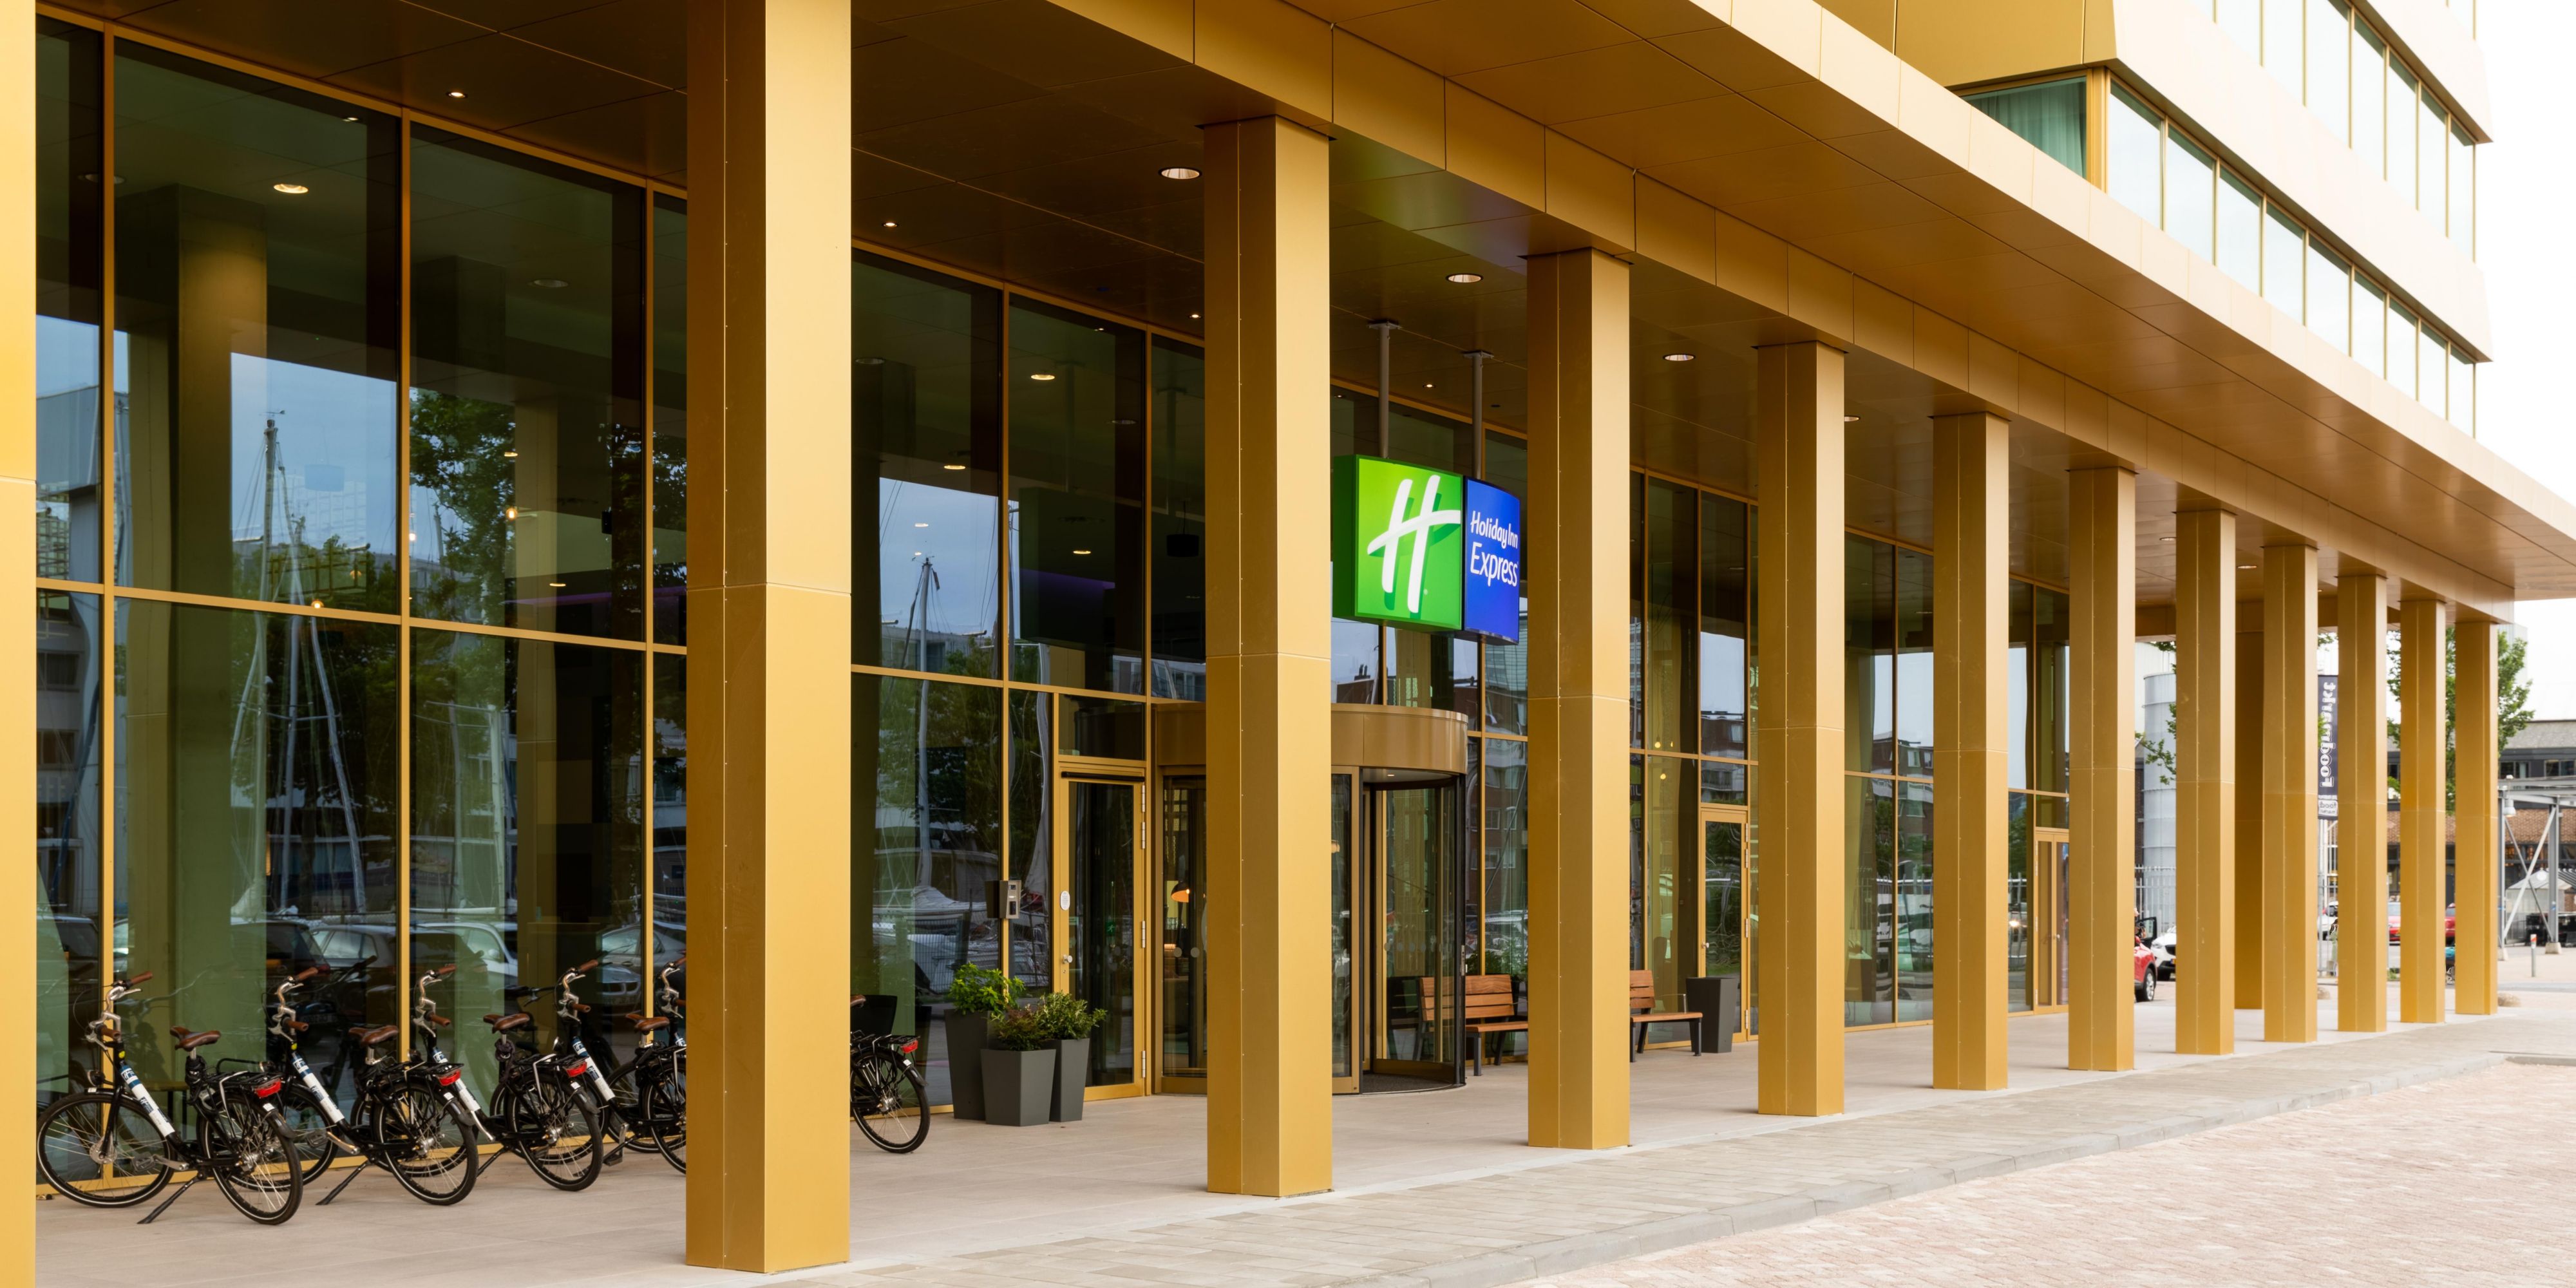 Travel like a local whilst staying at Holiday Inn Express Amsterdam - North Riverside. Our 30 hotel bikes are available upon request from reception but to guarantee availability, please reserve in advance through the email below. The cost of bike hire is €13 for 3 hours or €18 for 24 hours.